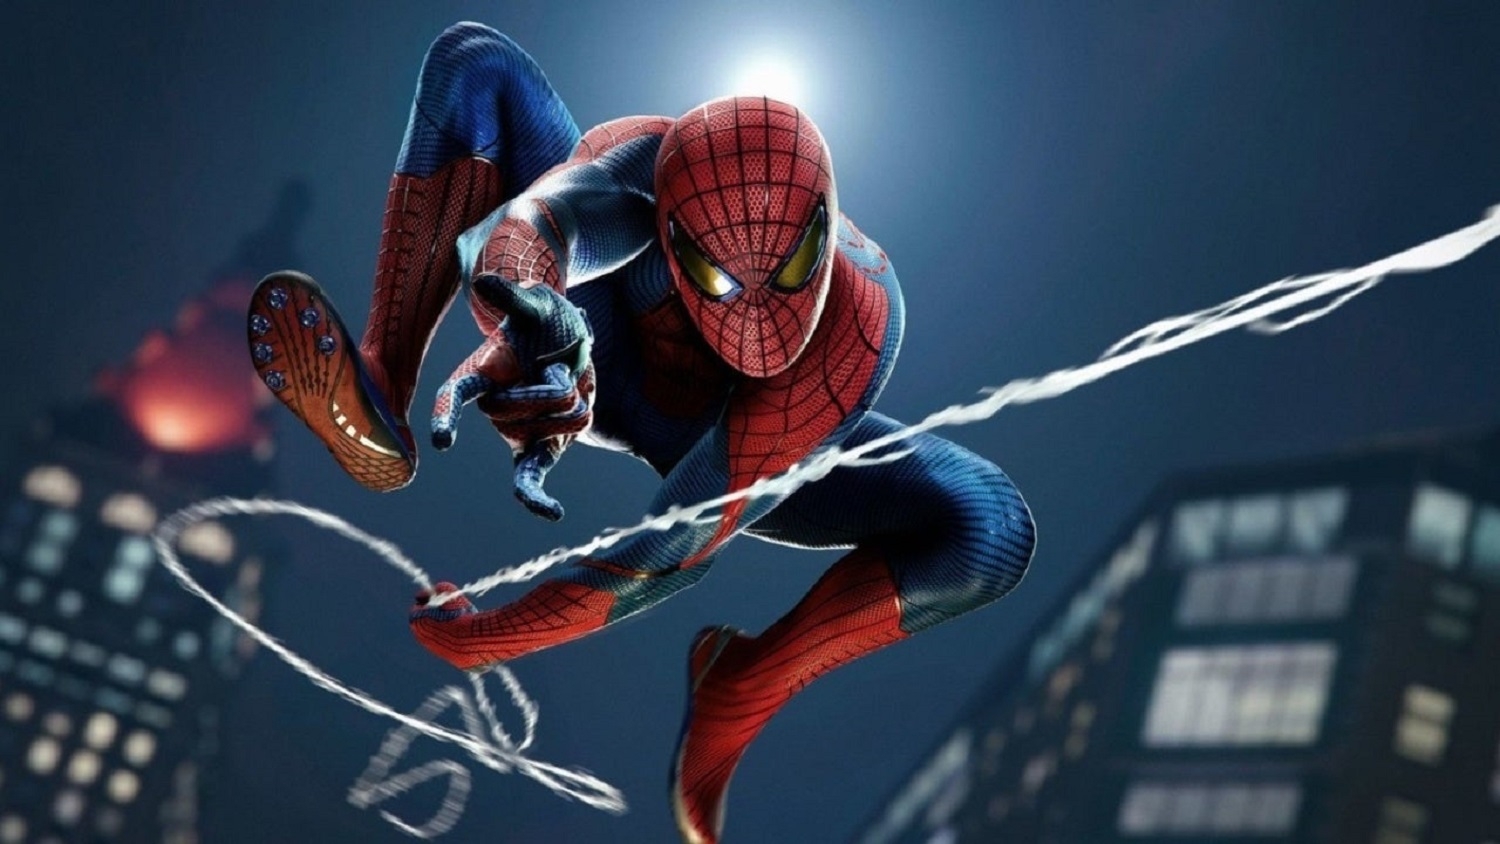 Spider-Man 2 PS5 tech analysis: Fidelity & Performance modes